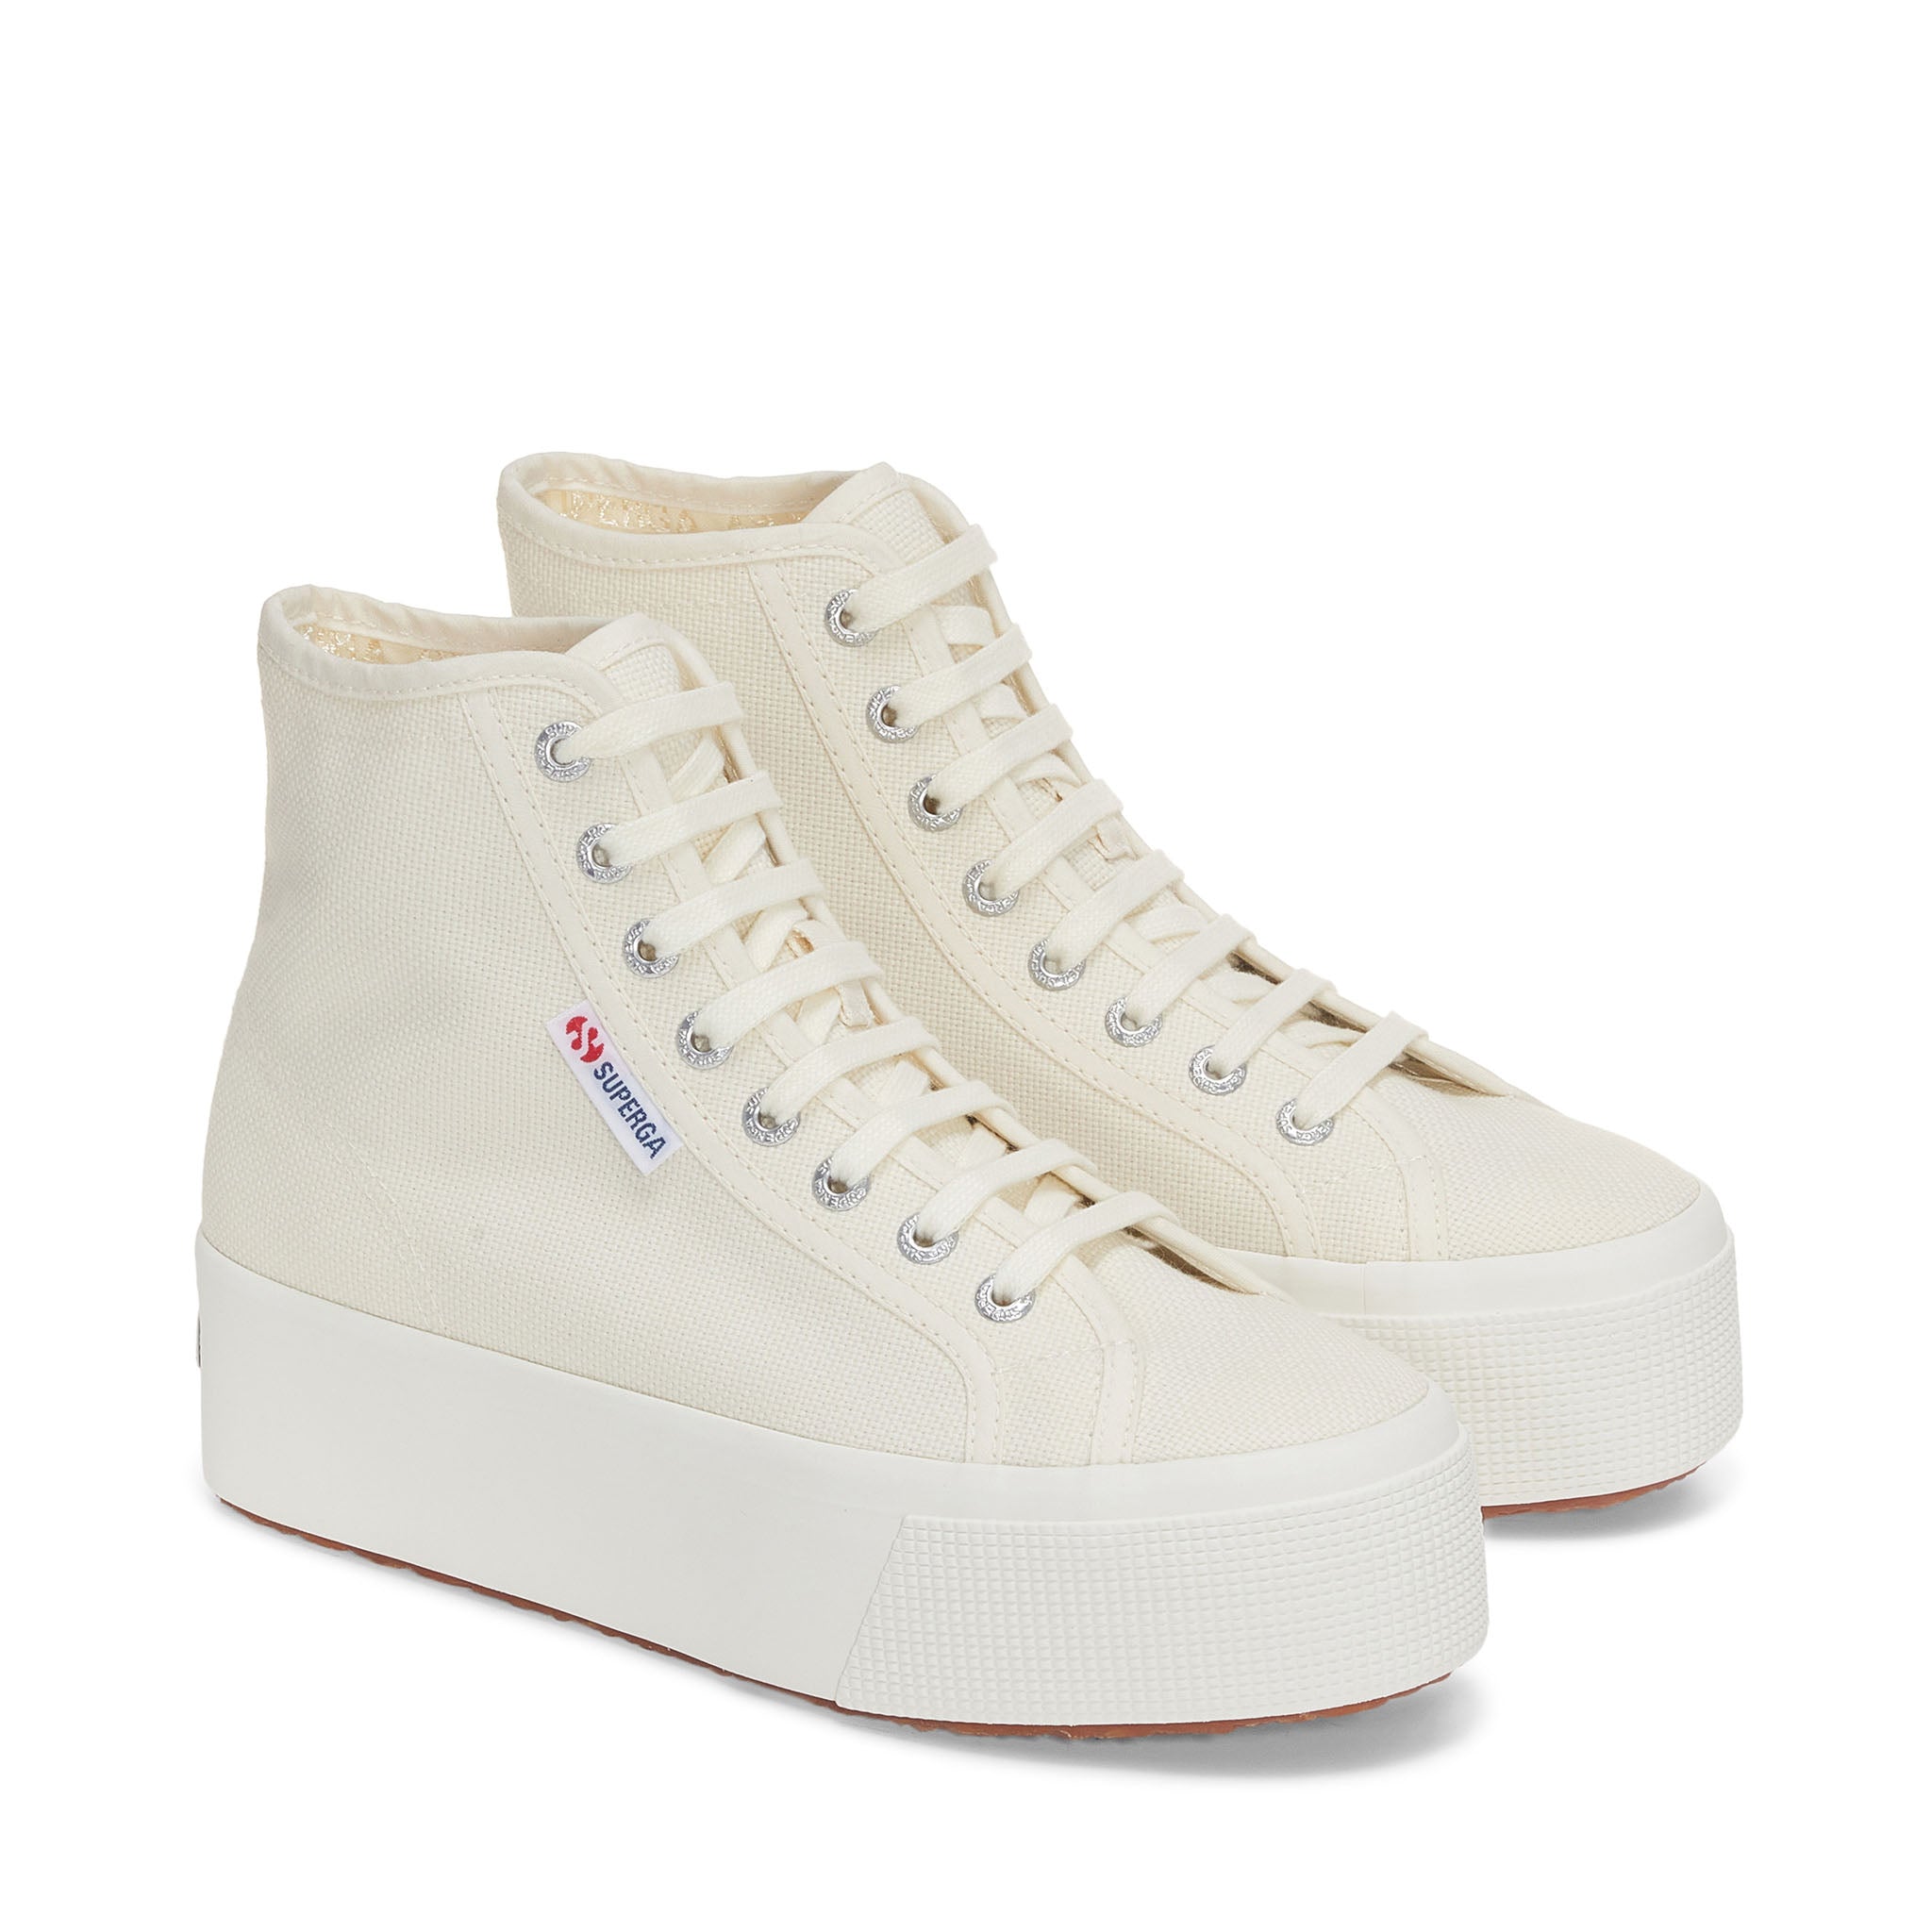 Superga 2708 High Top Sneakers - Beige Natural Avorio. Front view.